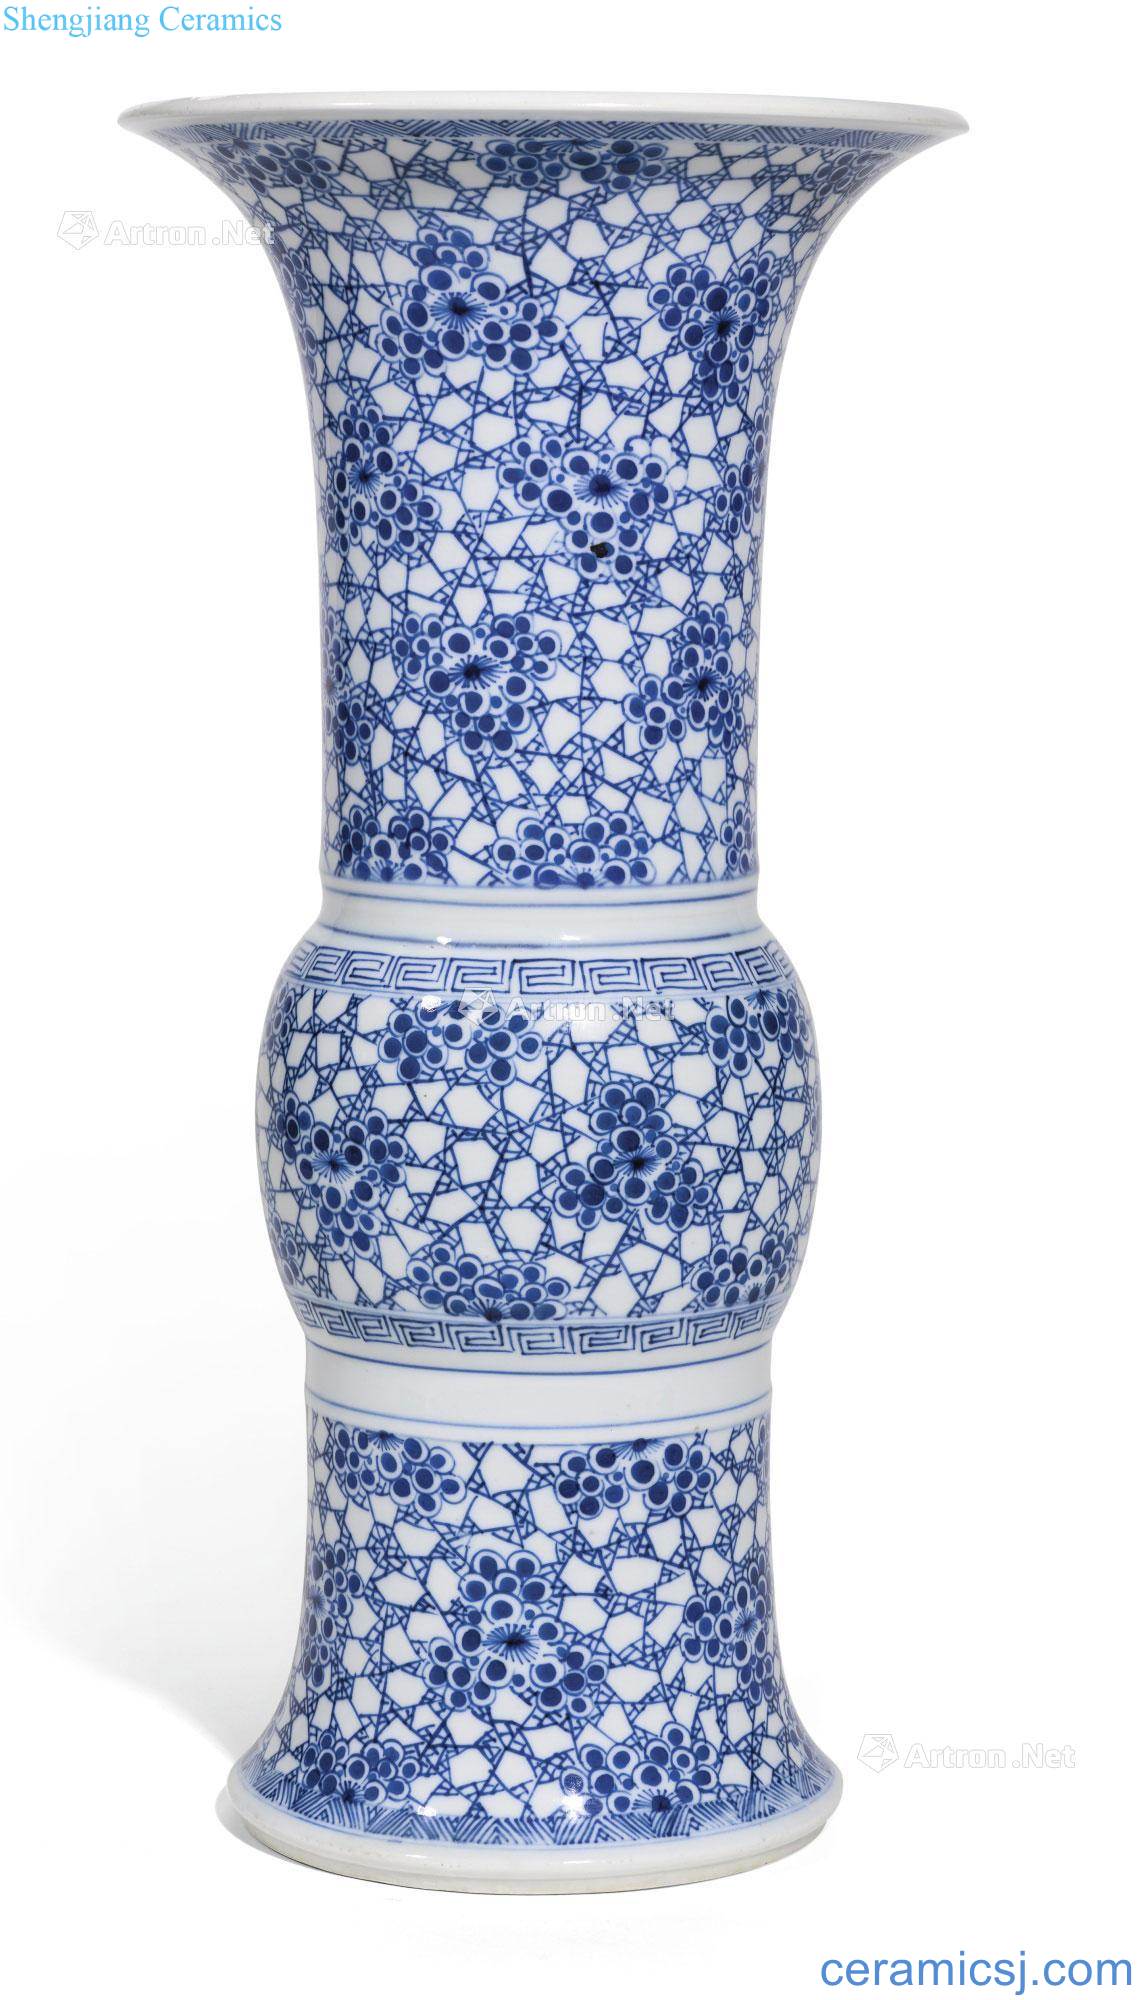 The qing emperor kangxi Blue and white plum flower pattern vase with flowers